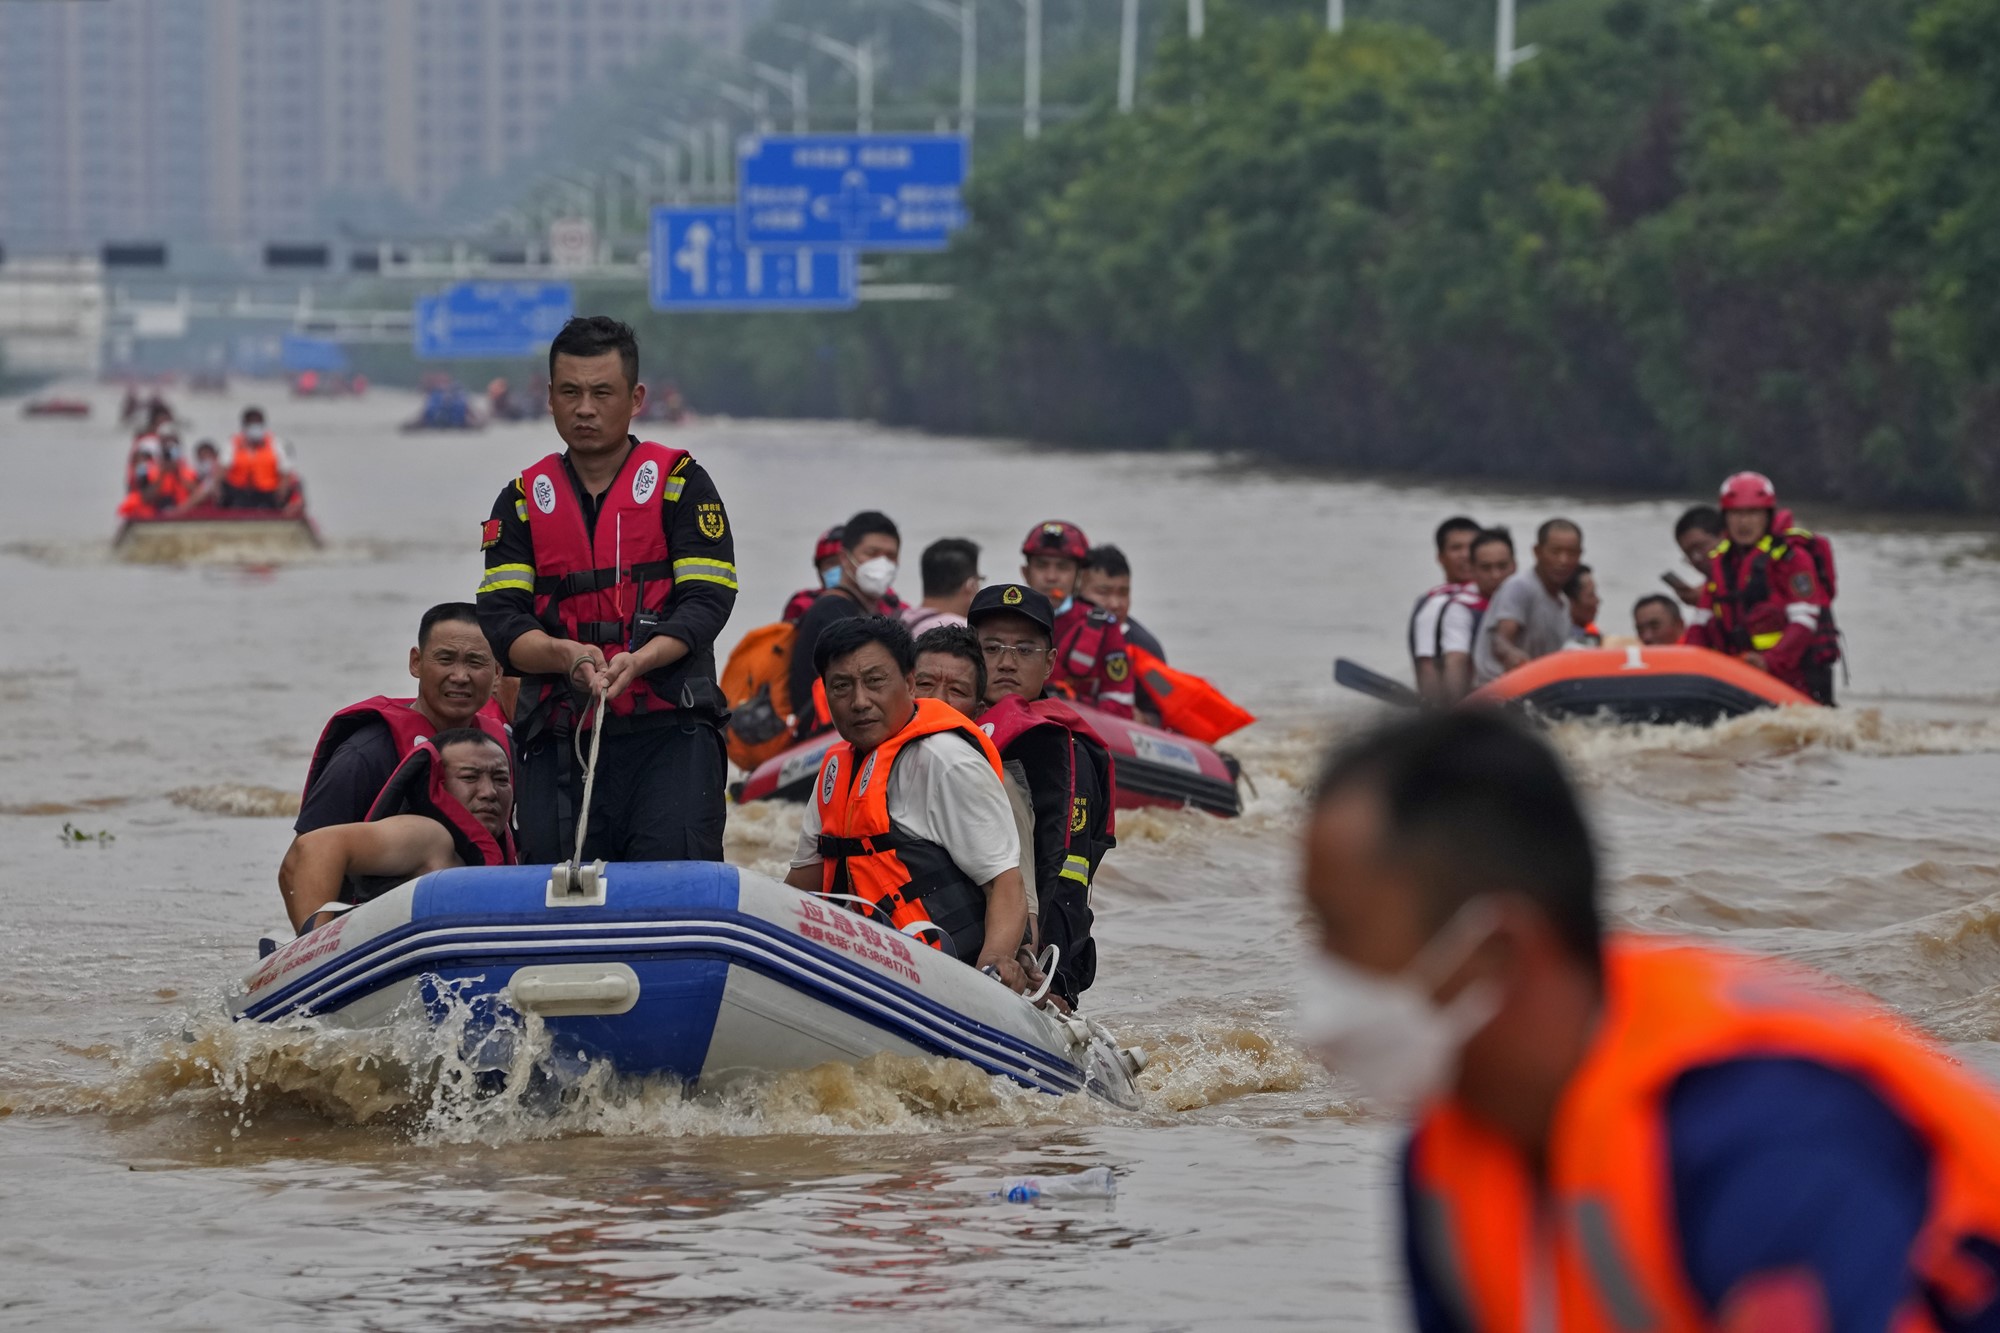 People on small rubber boats moving throug a flooded highway, with trees on the side and tall buildings in the background